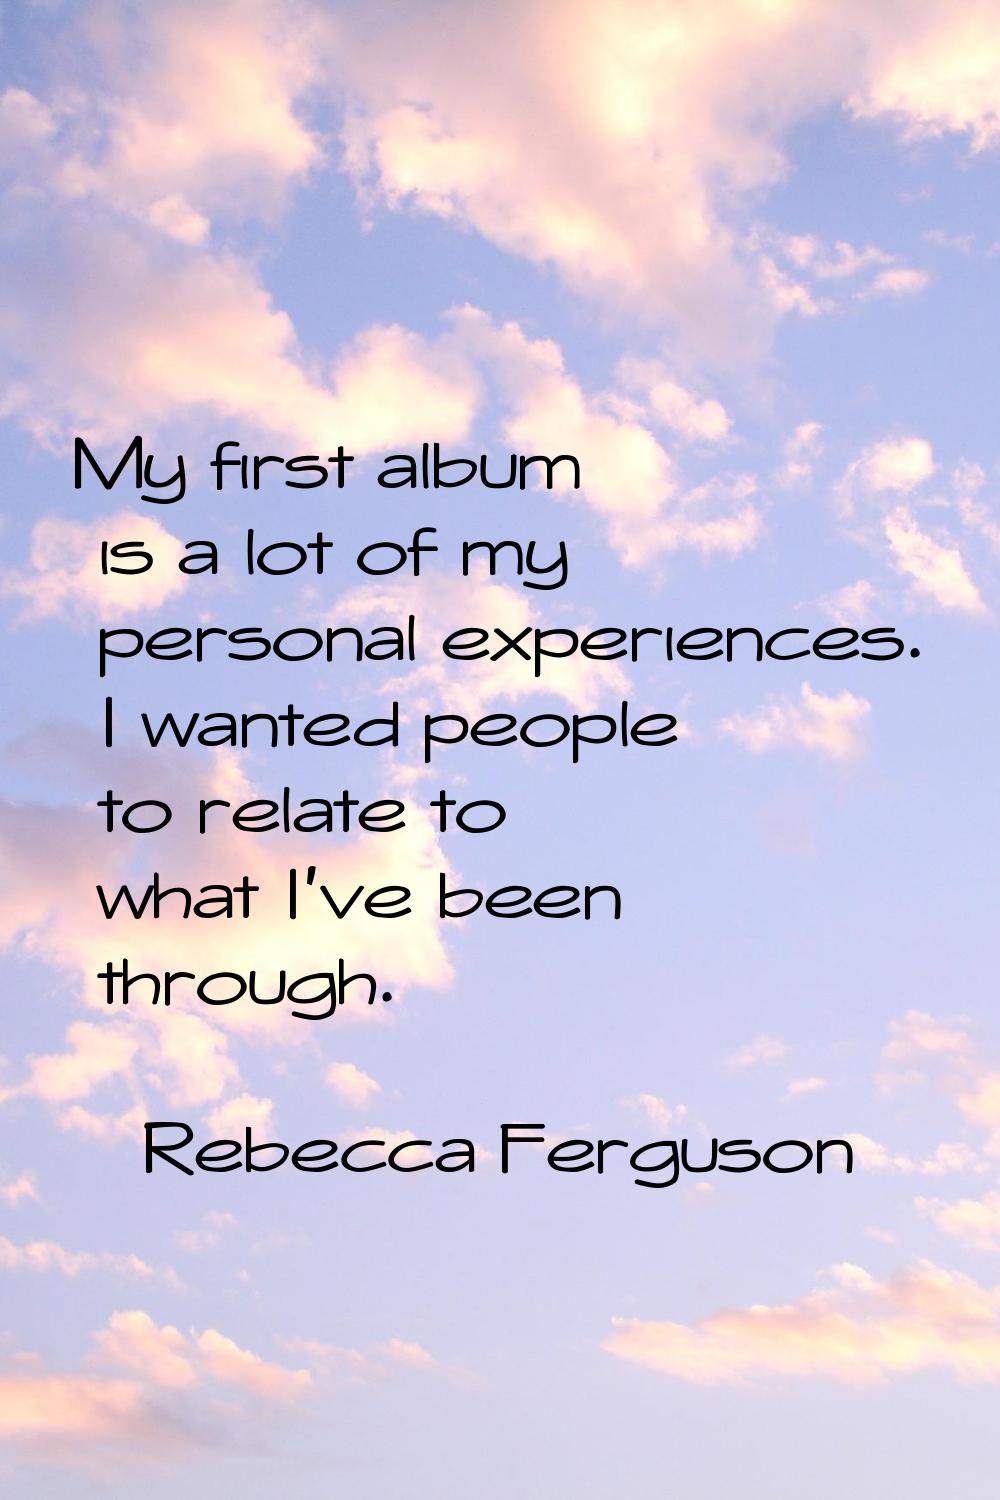 My first album is a lot of my personal experiences. I wanted people to relate to what I've been thr